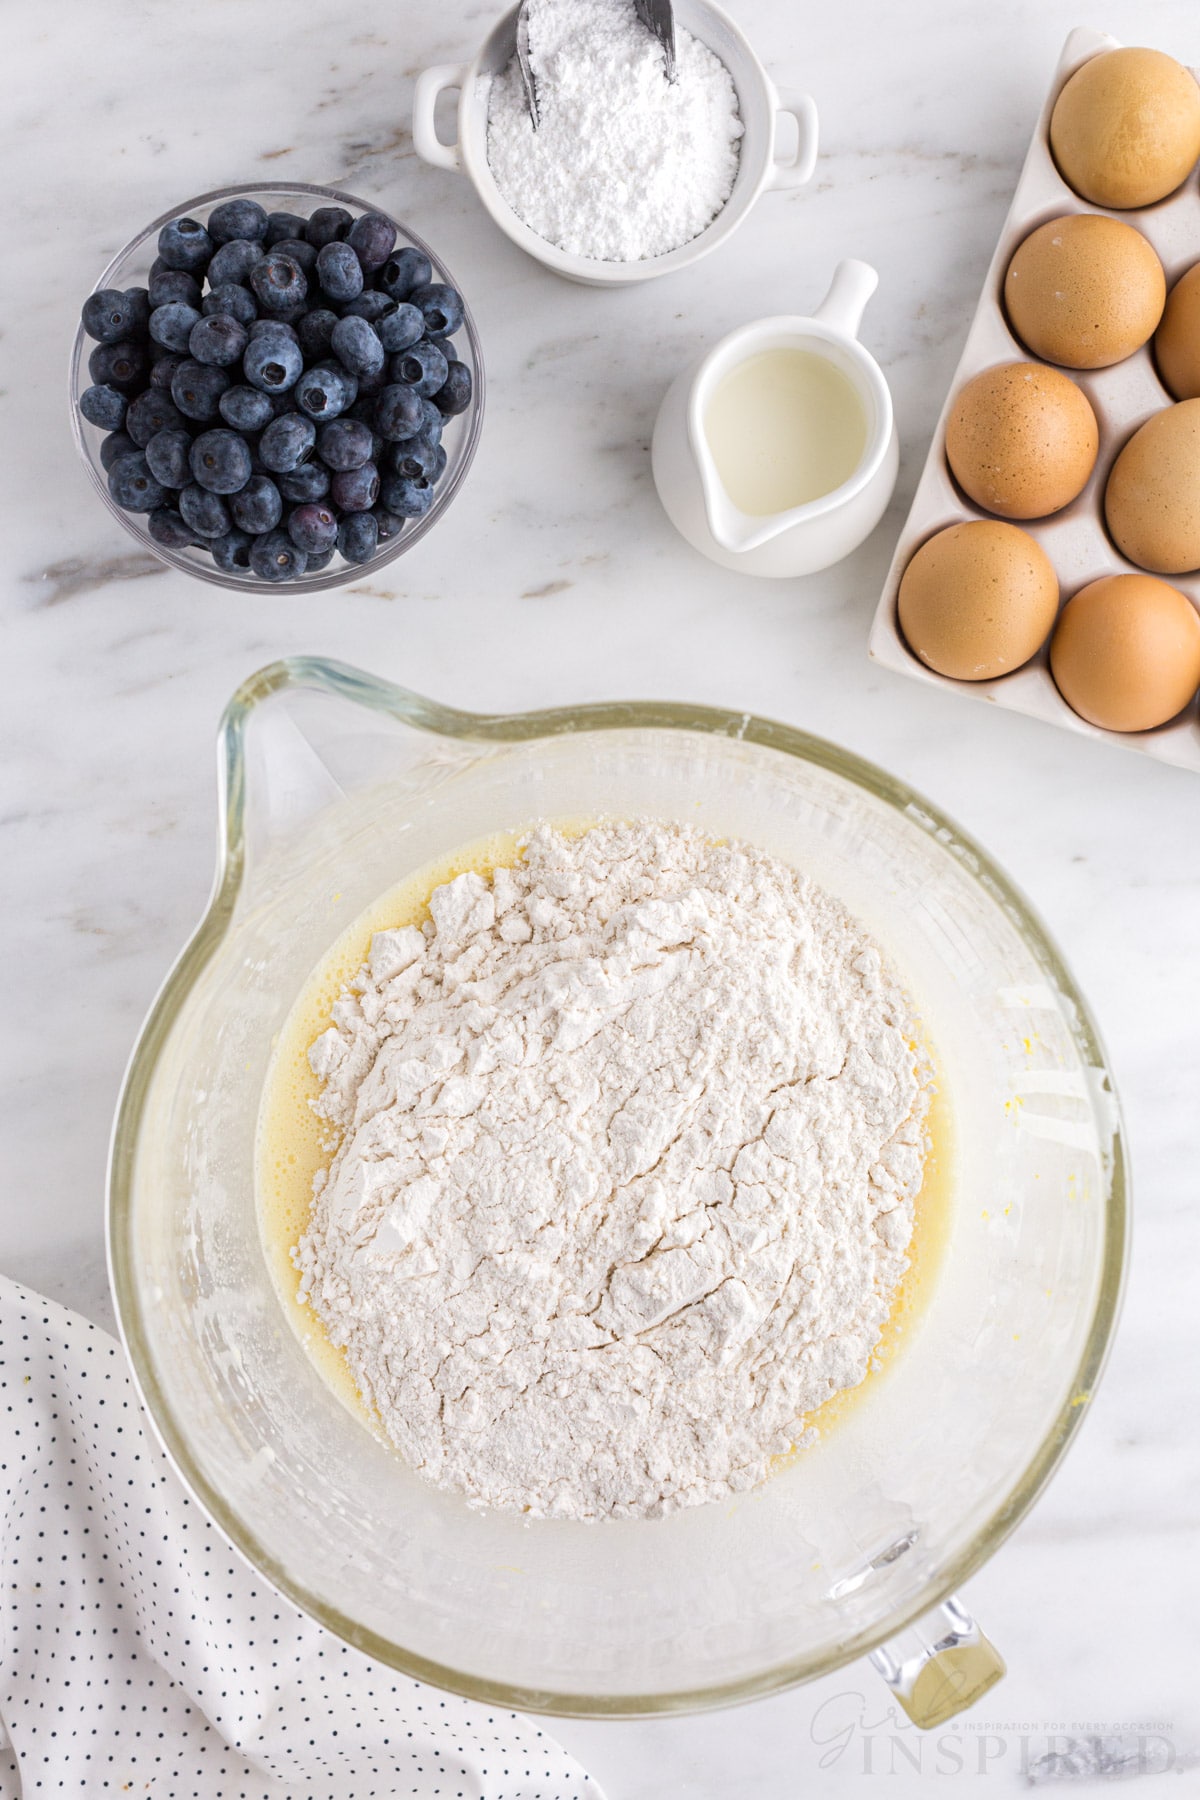 Glass mixing bowl with flour added to the mixed wet ingredients, bowl of fresh blueberries, tray of eggs, jug of milk, bowl of sugar, polka dot linen, on a white marble countertop.